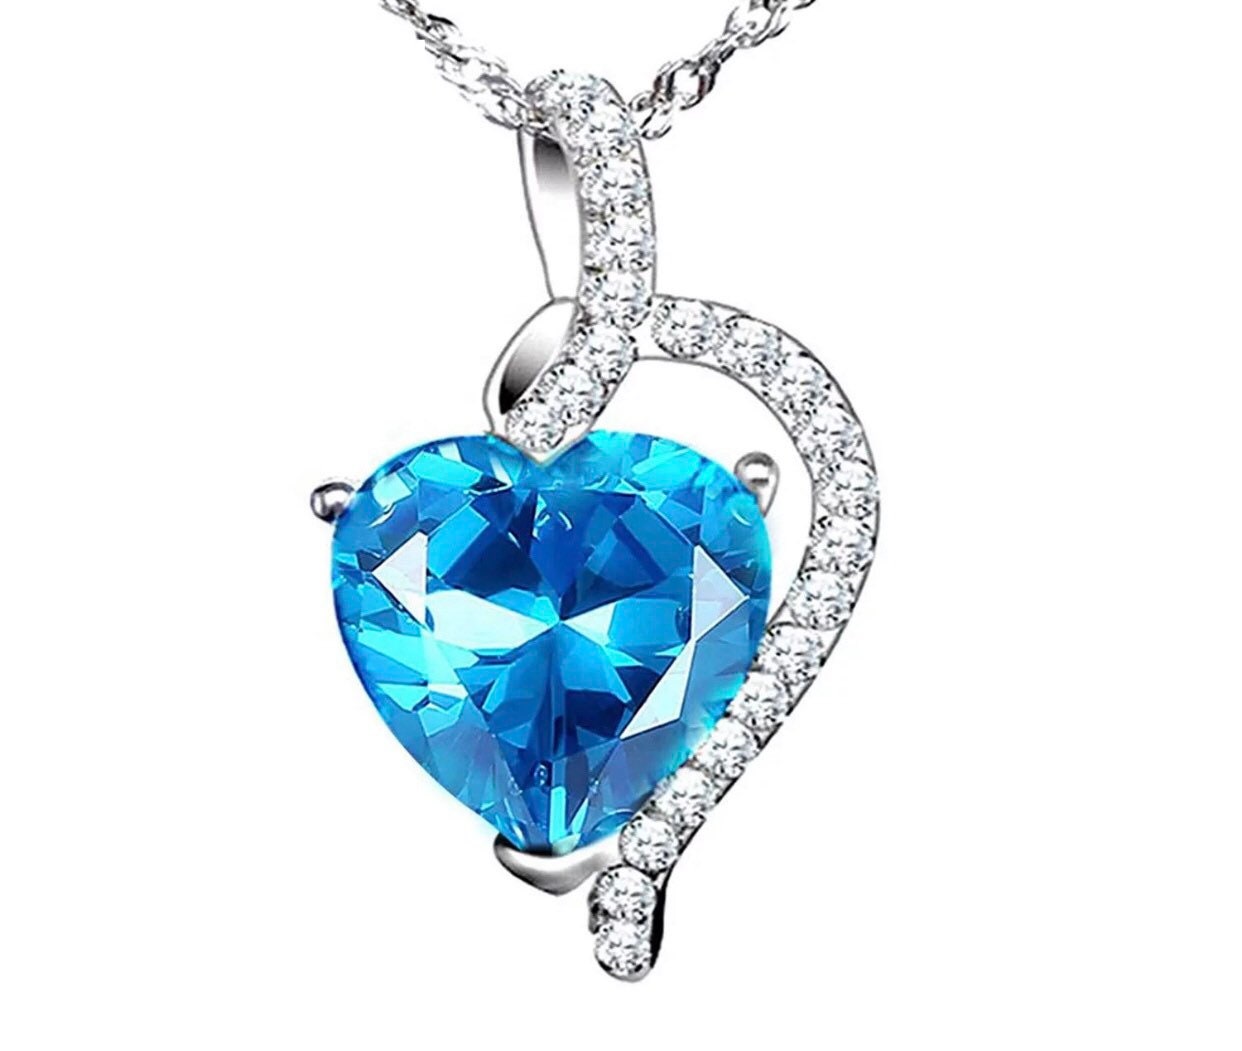 Blue Sapphire Sterling Silver Charm Necklace